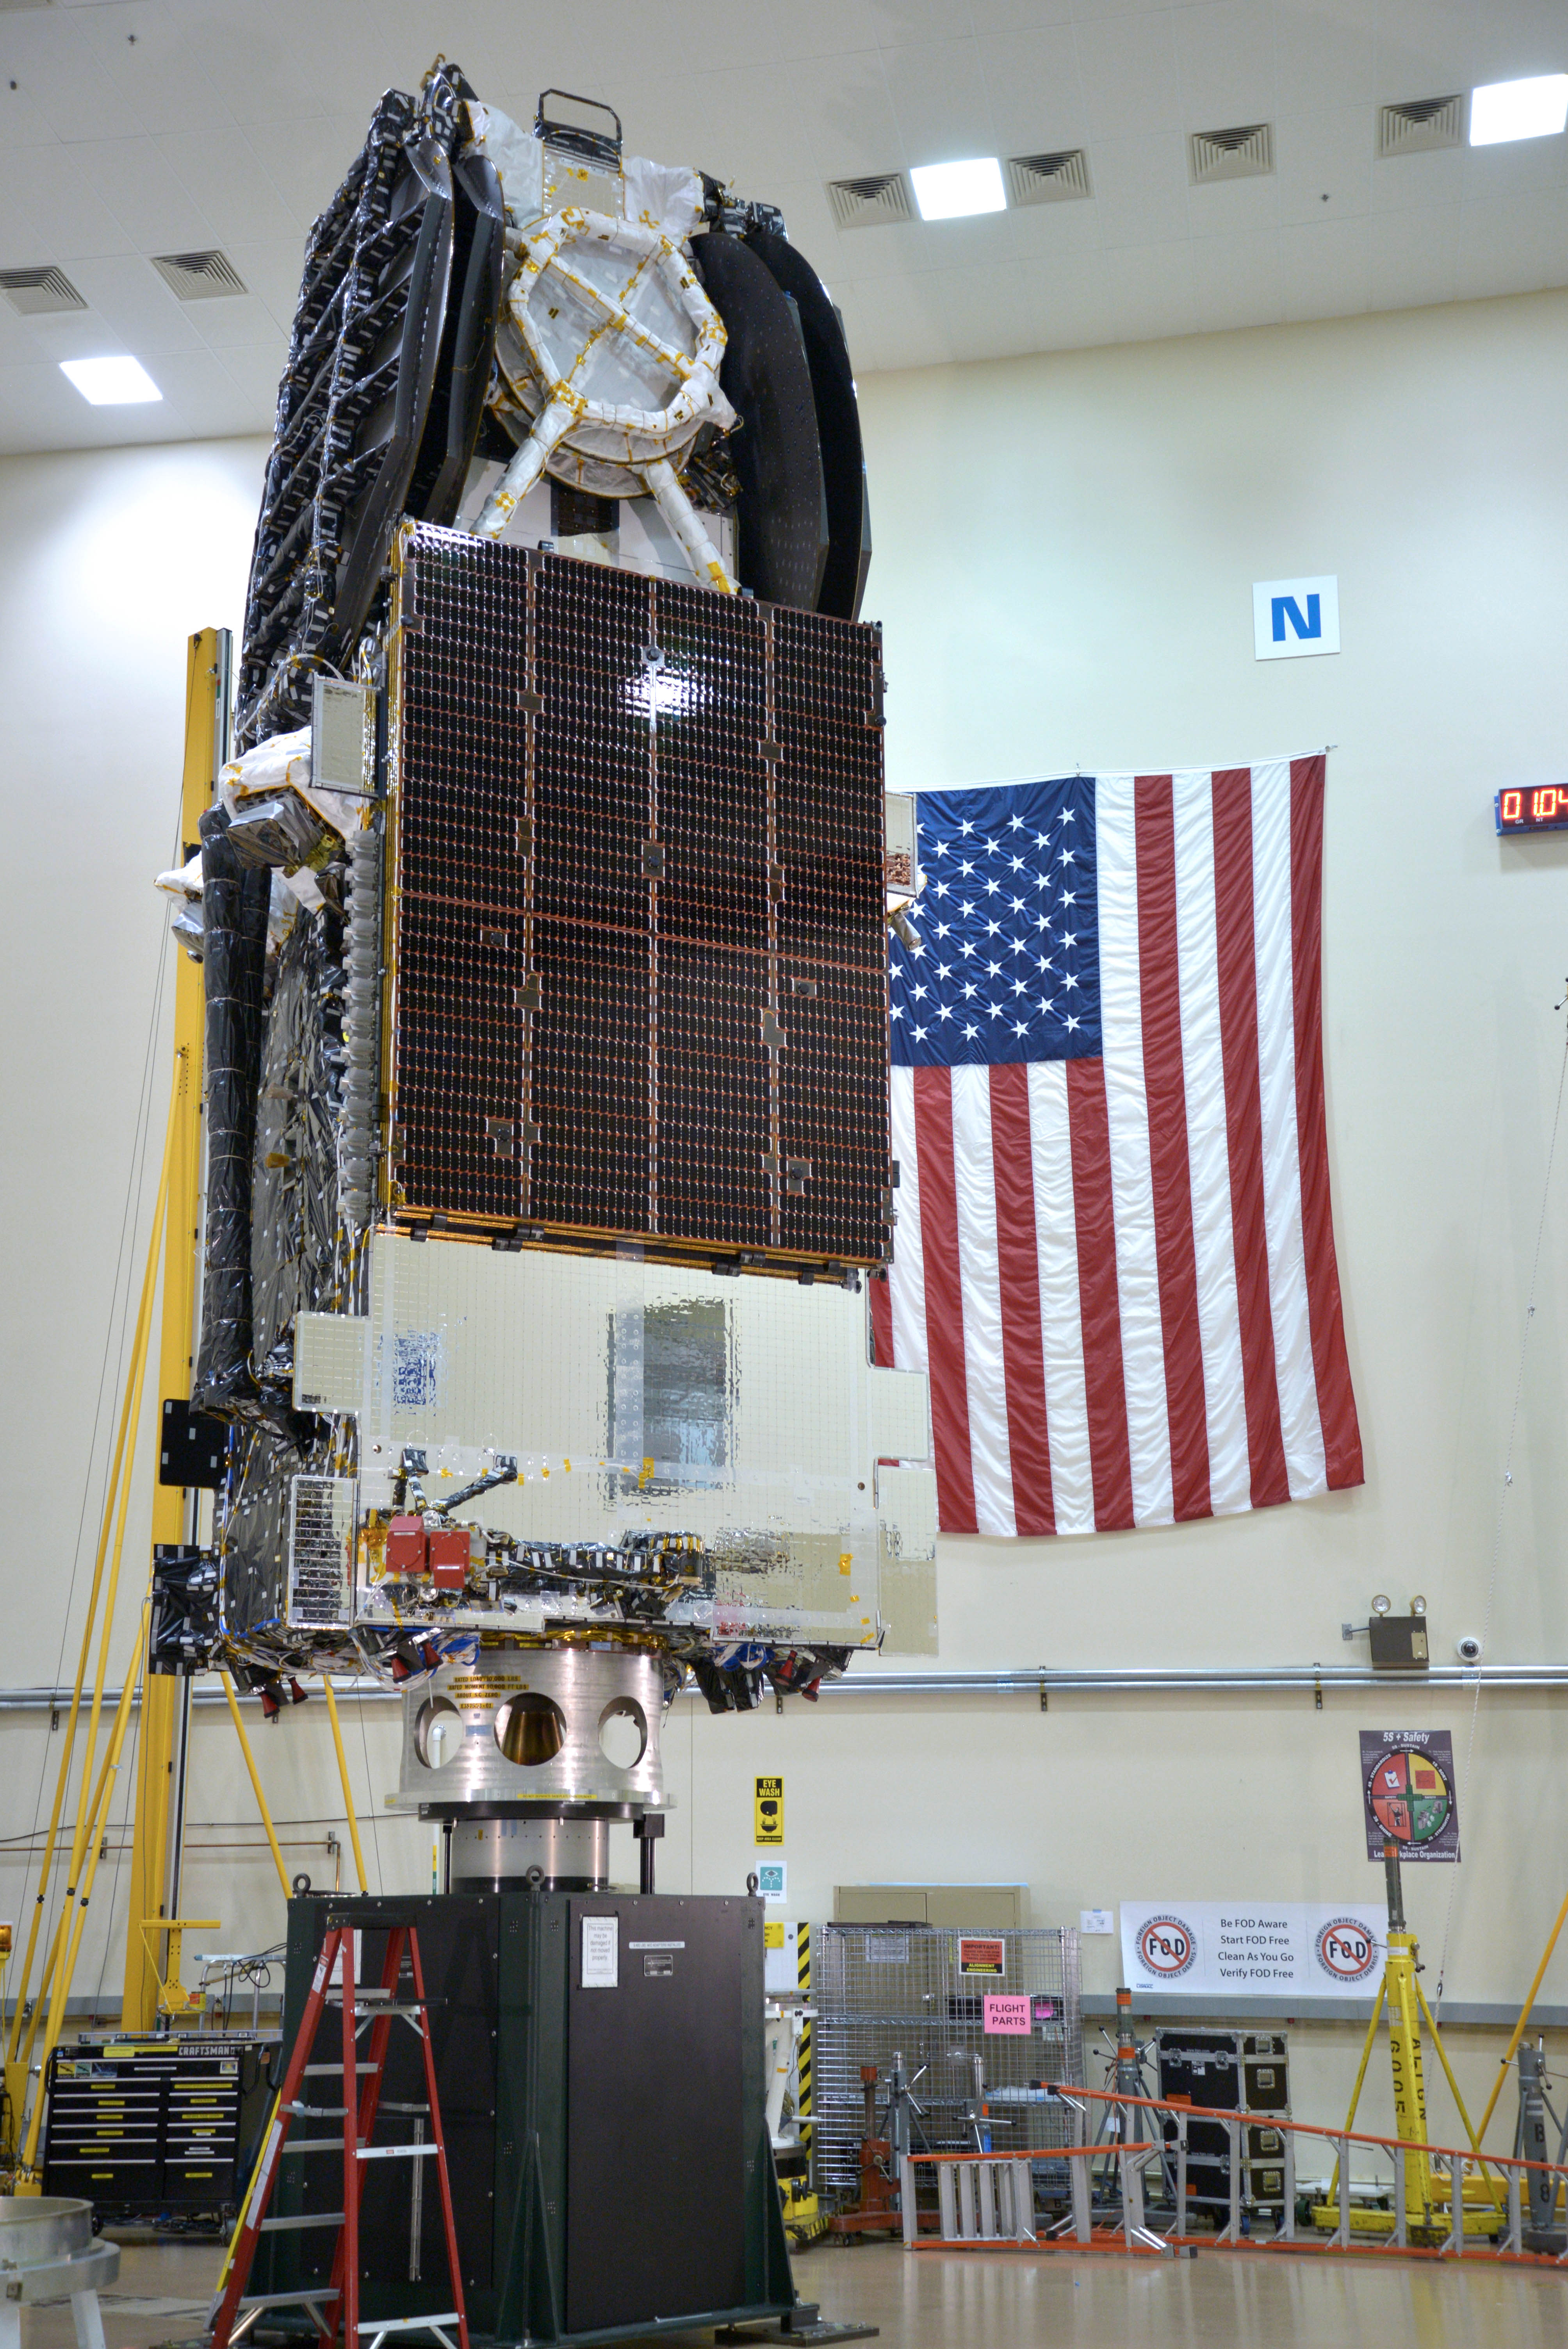 The Sky Muster satellite built by SSL